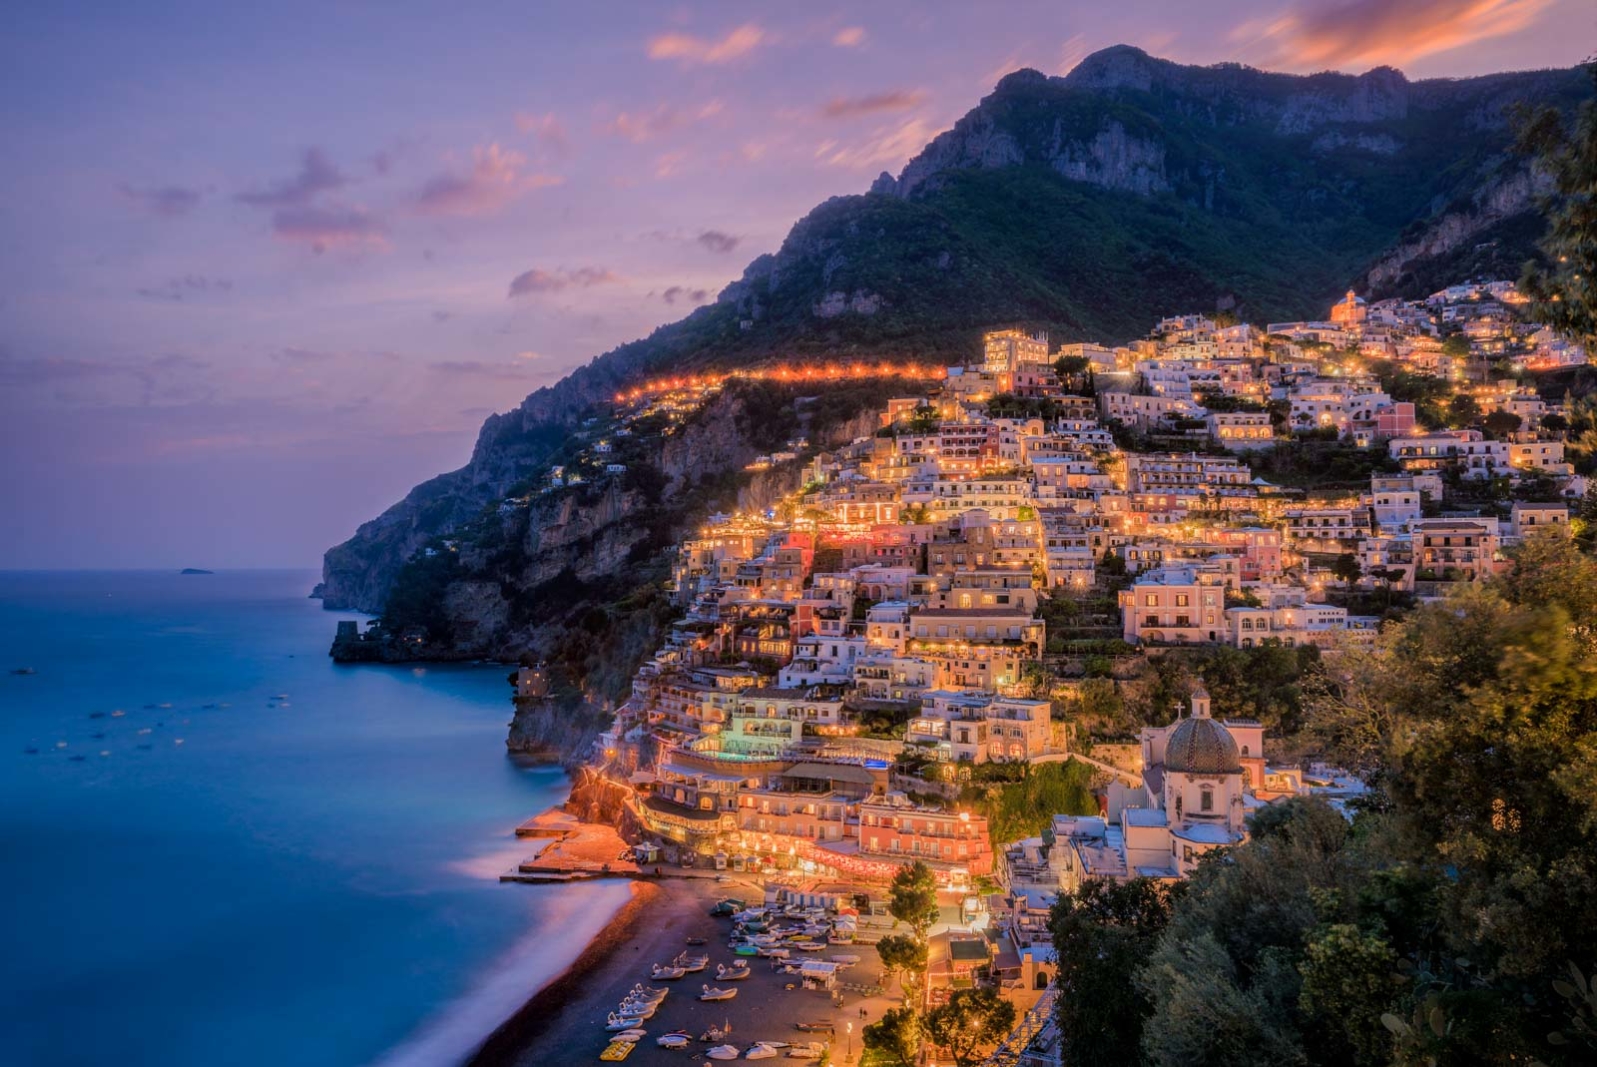 Where to Stay in Positano Italy